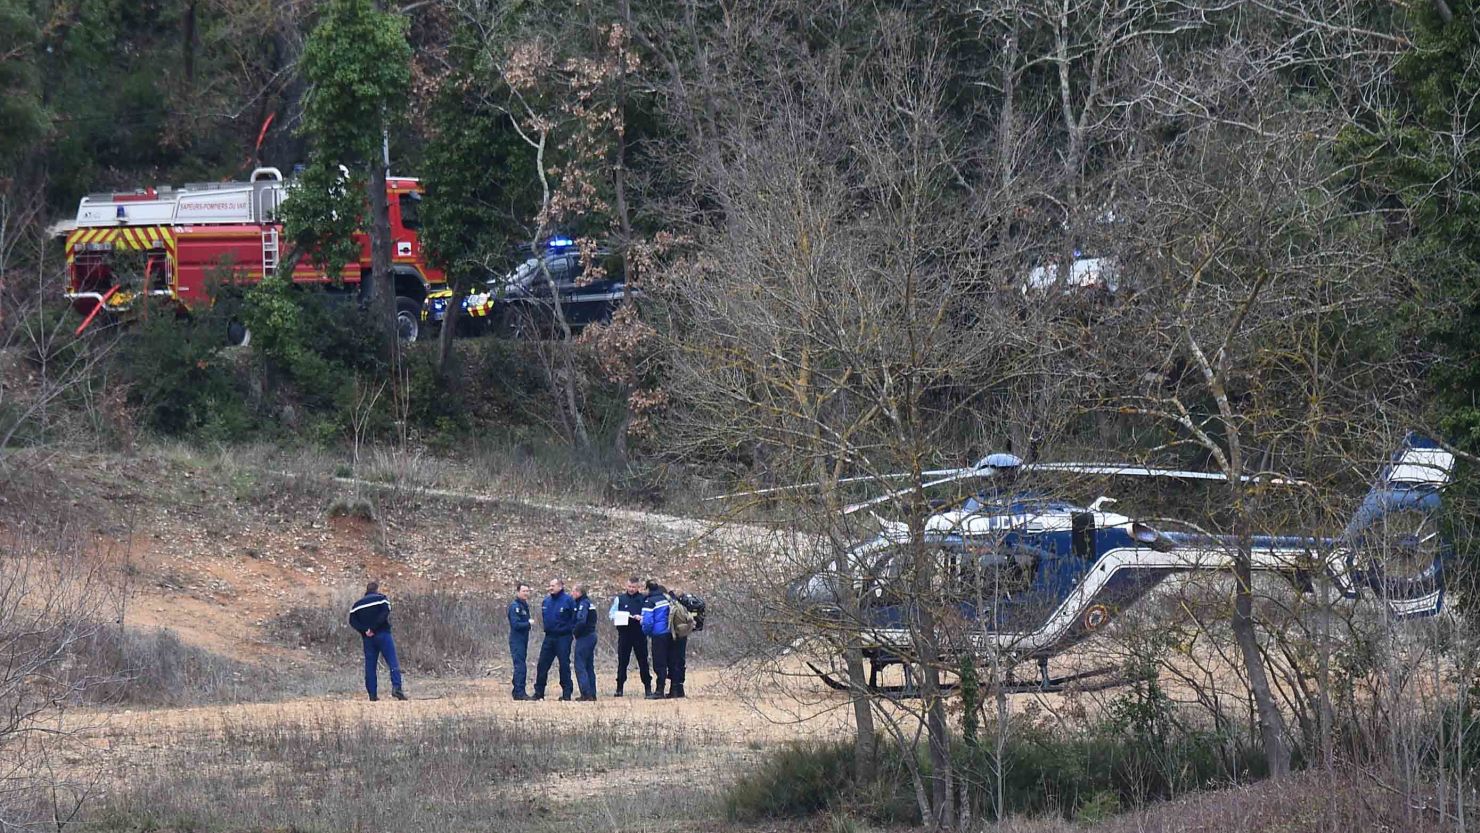 Emergency services work at the site of the accident near Carces lake in southern France Friday.